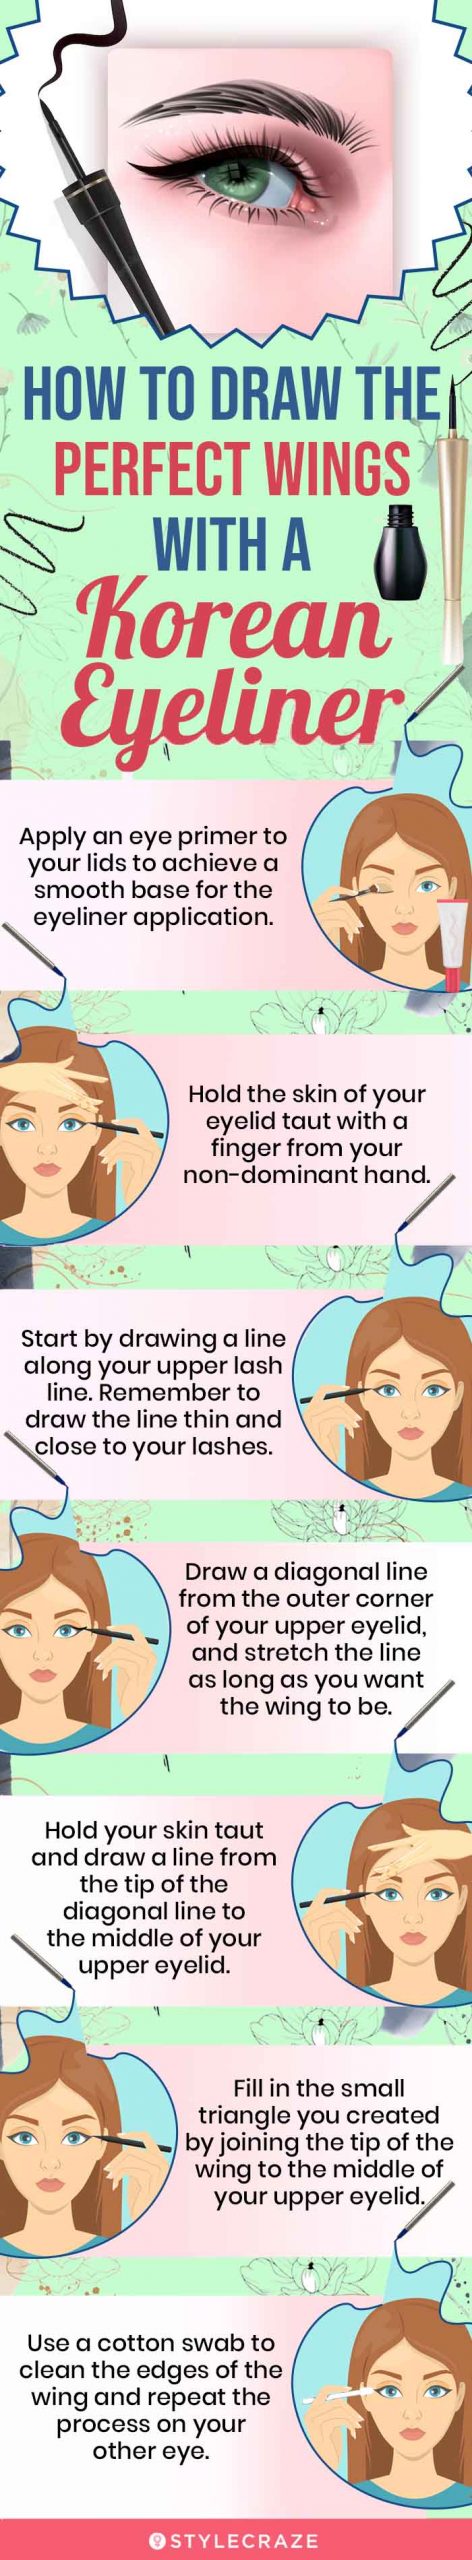 How To Draw The Perfect Wings With A Korean Eyeliners